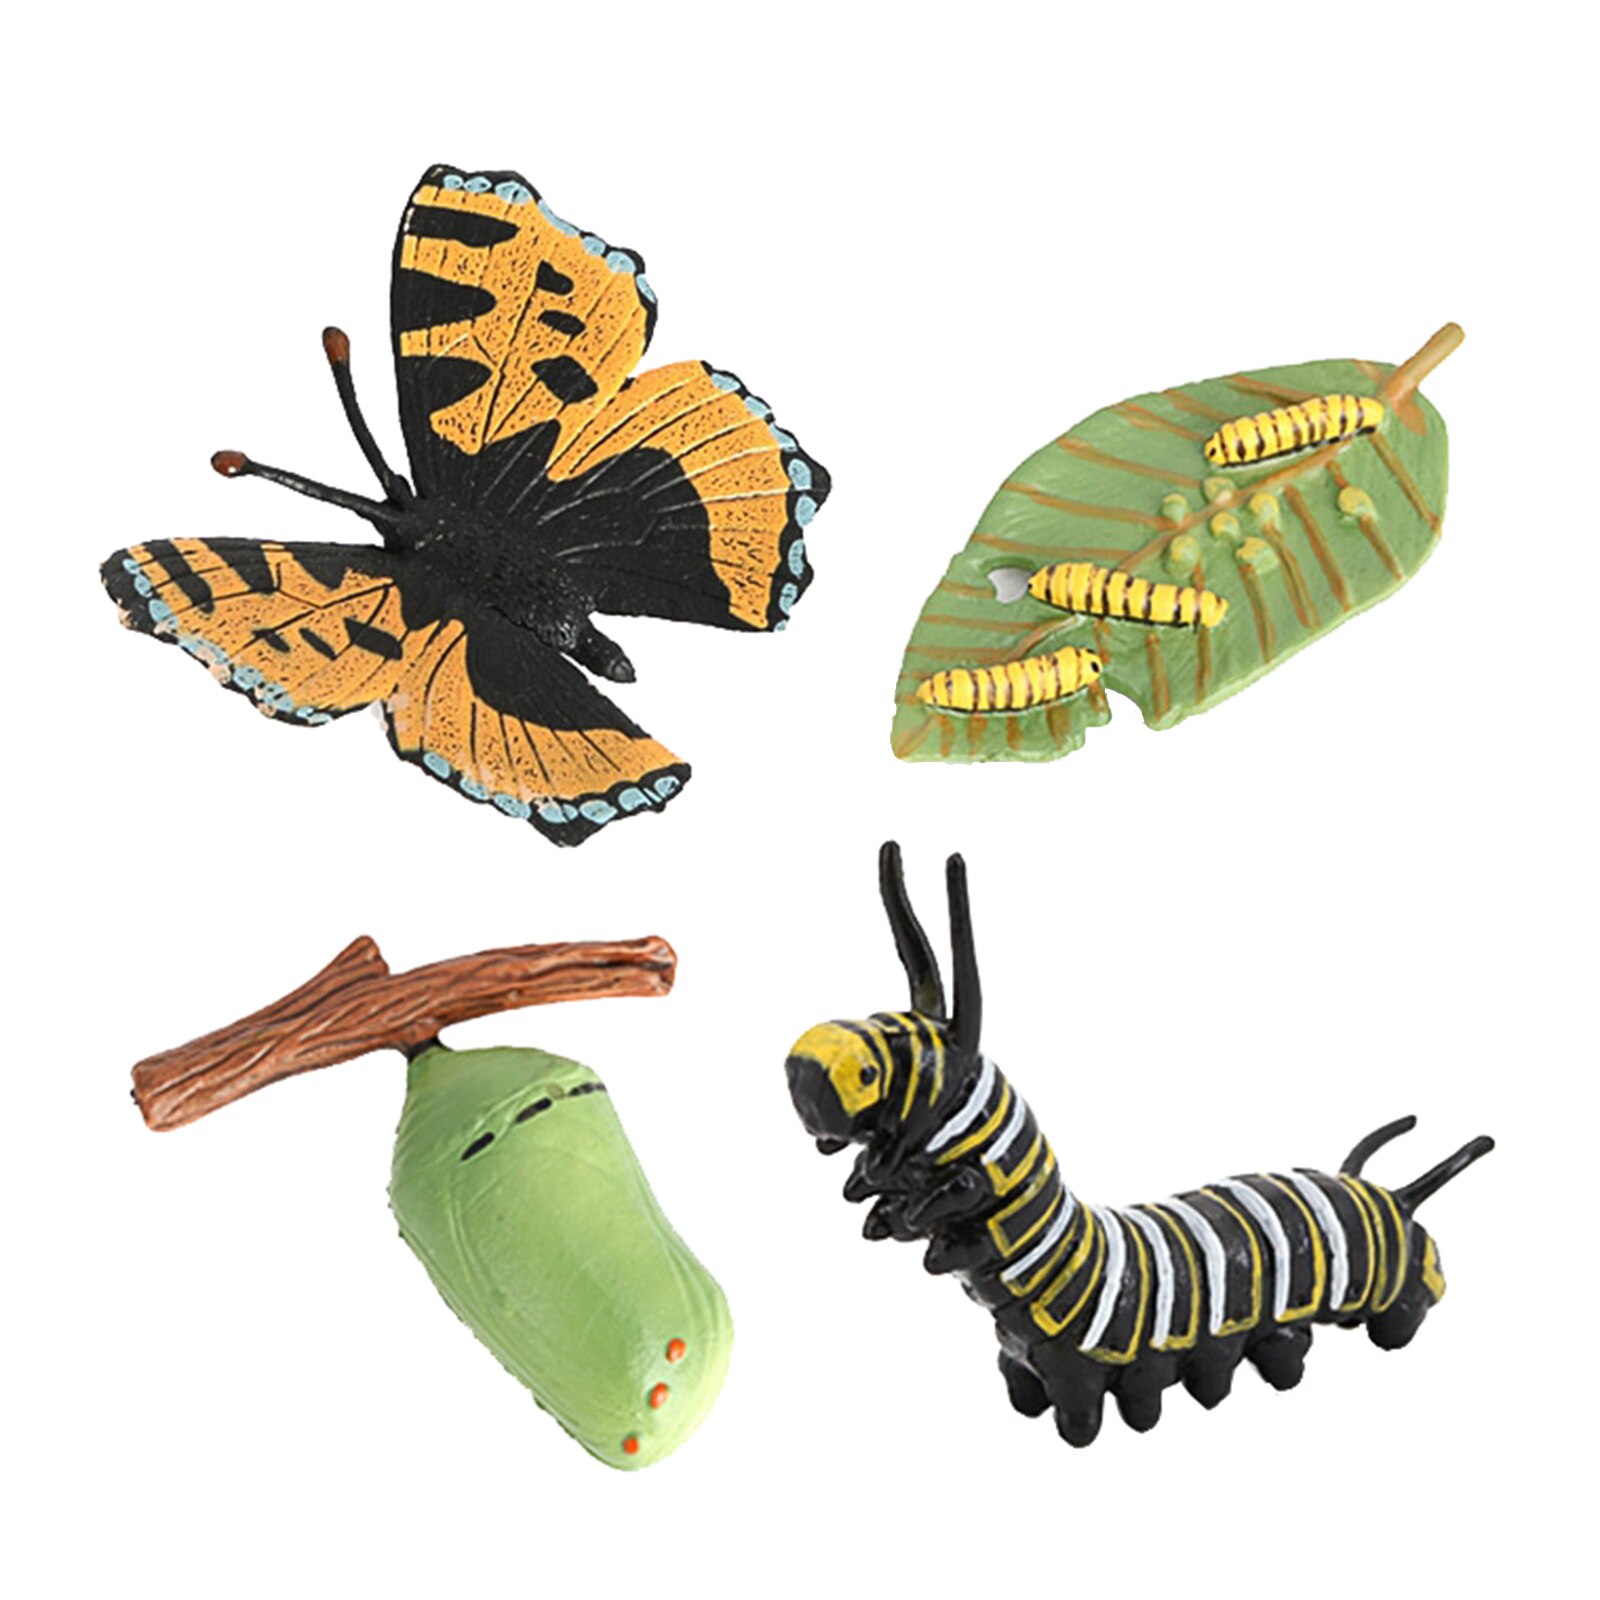 Life Cycle of a Monarch Butterfly， Nature Insects Life Cycles Growth Model Game Prop，Insect Animal Natural Education Toy